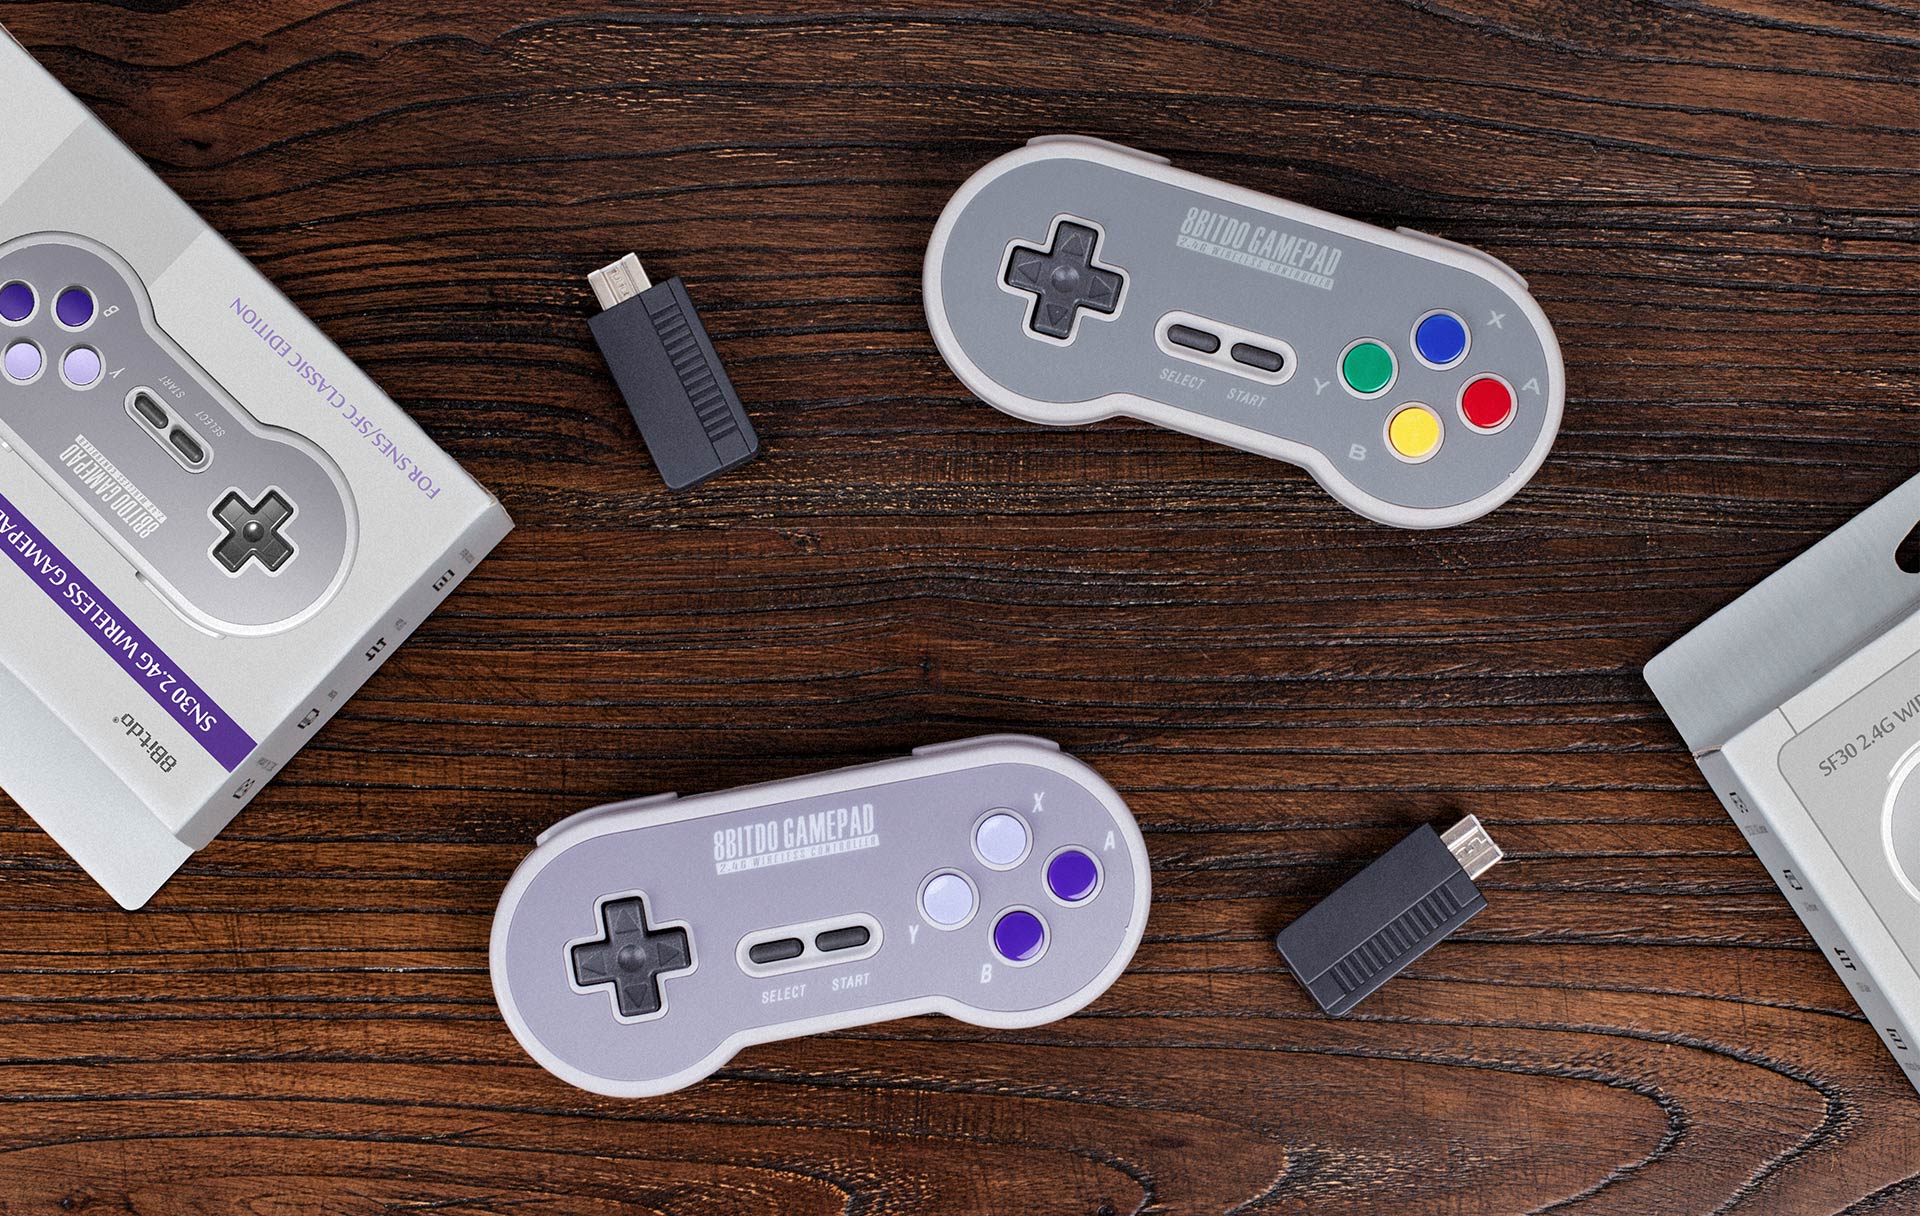 SN30 2.4G and SF30 2.4G for and SFC Classic | 8BitDo